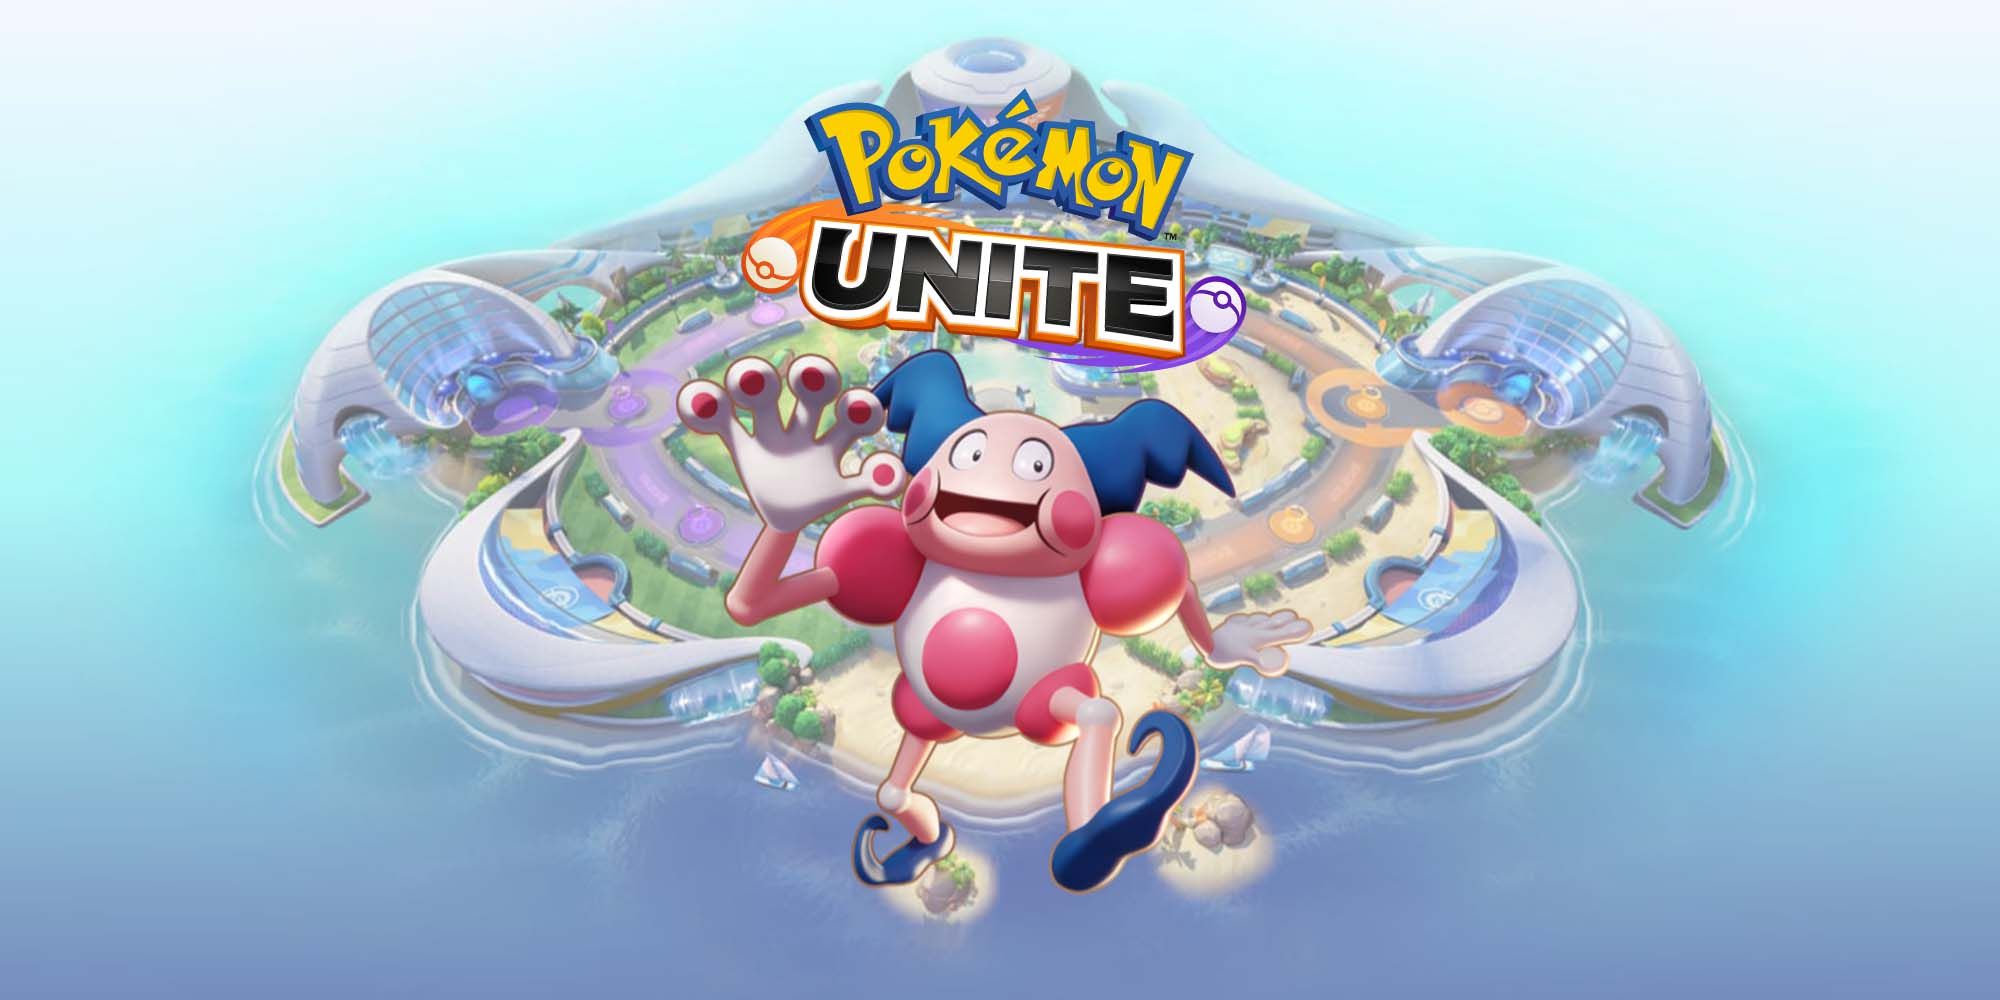 Mr. Mime from Pokemon Unite in front of an image of the island and game logo